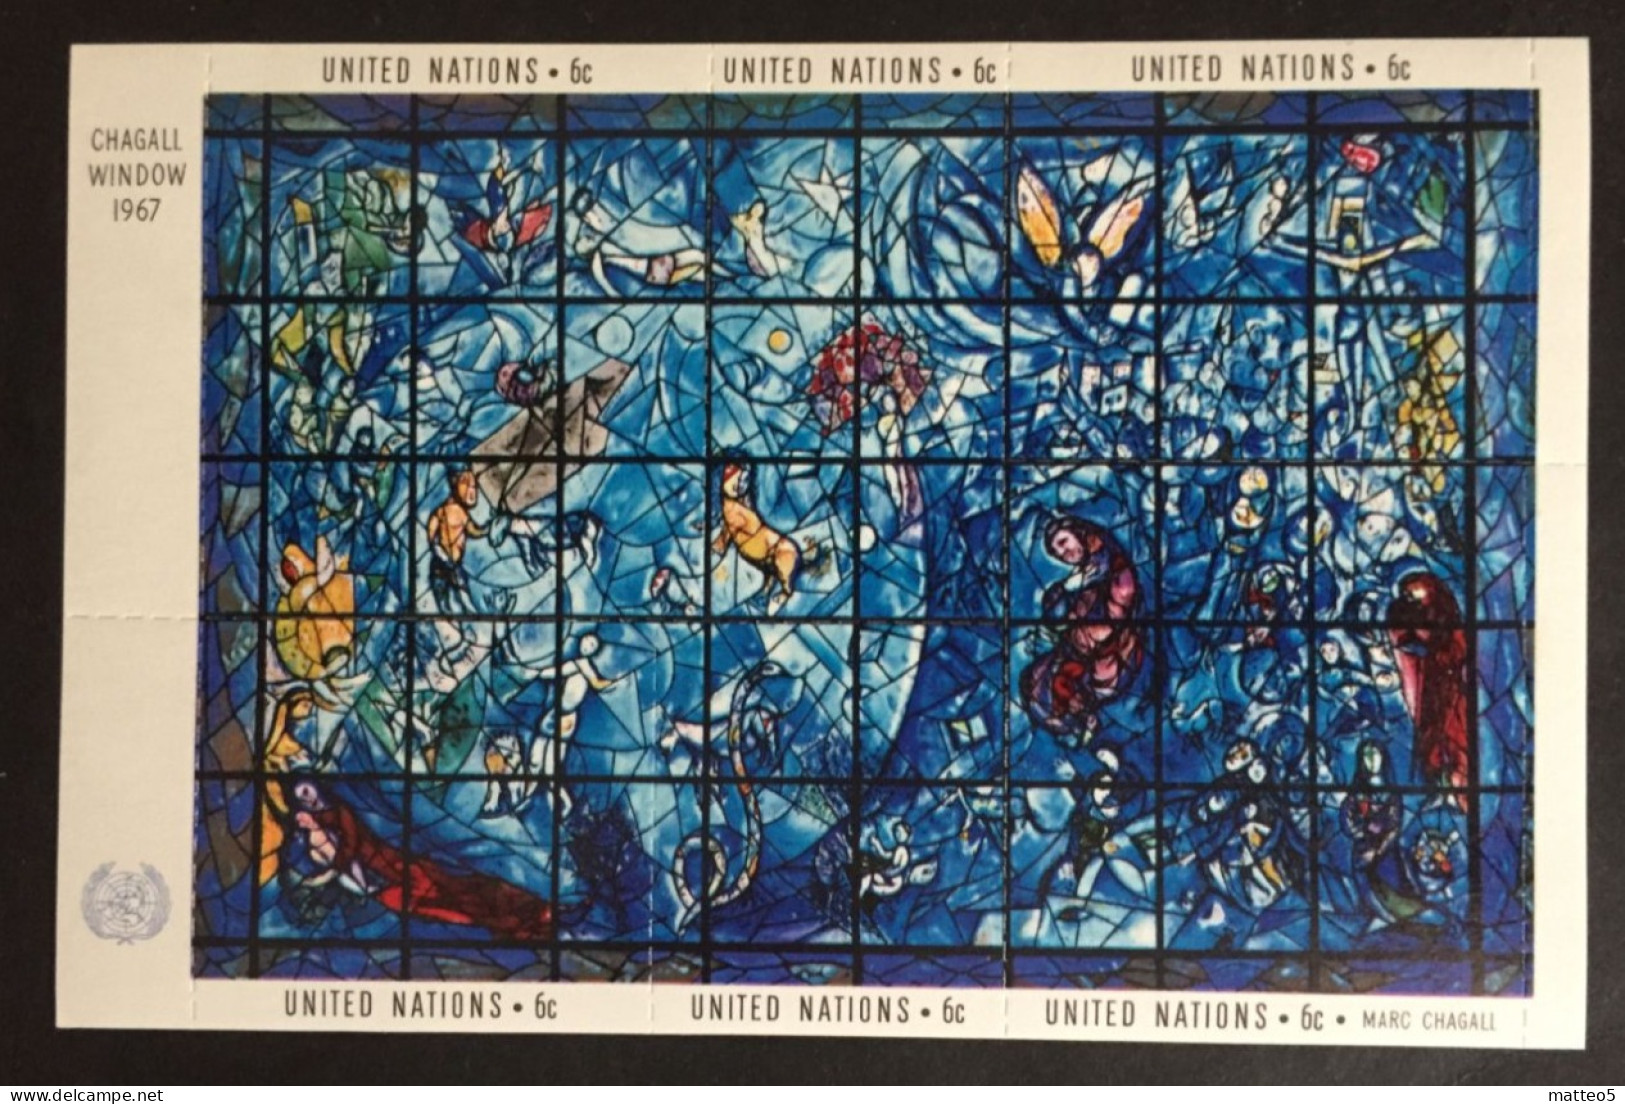 1967 - United Nations UNO UN - Marc Chagall - Window - Stained Glass Painting Art - Sheet - Unused - Neufs